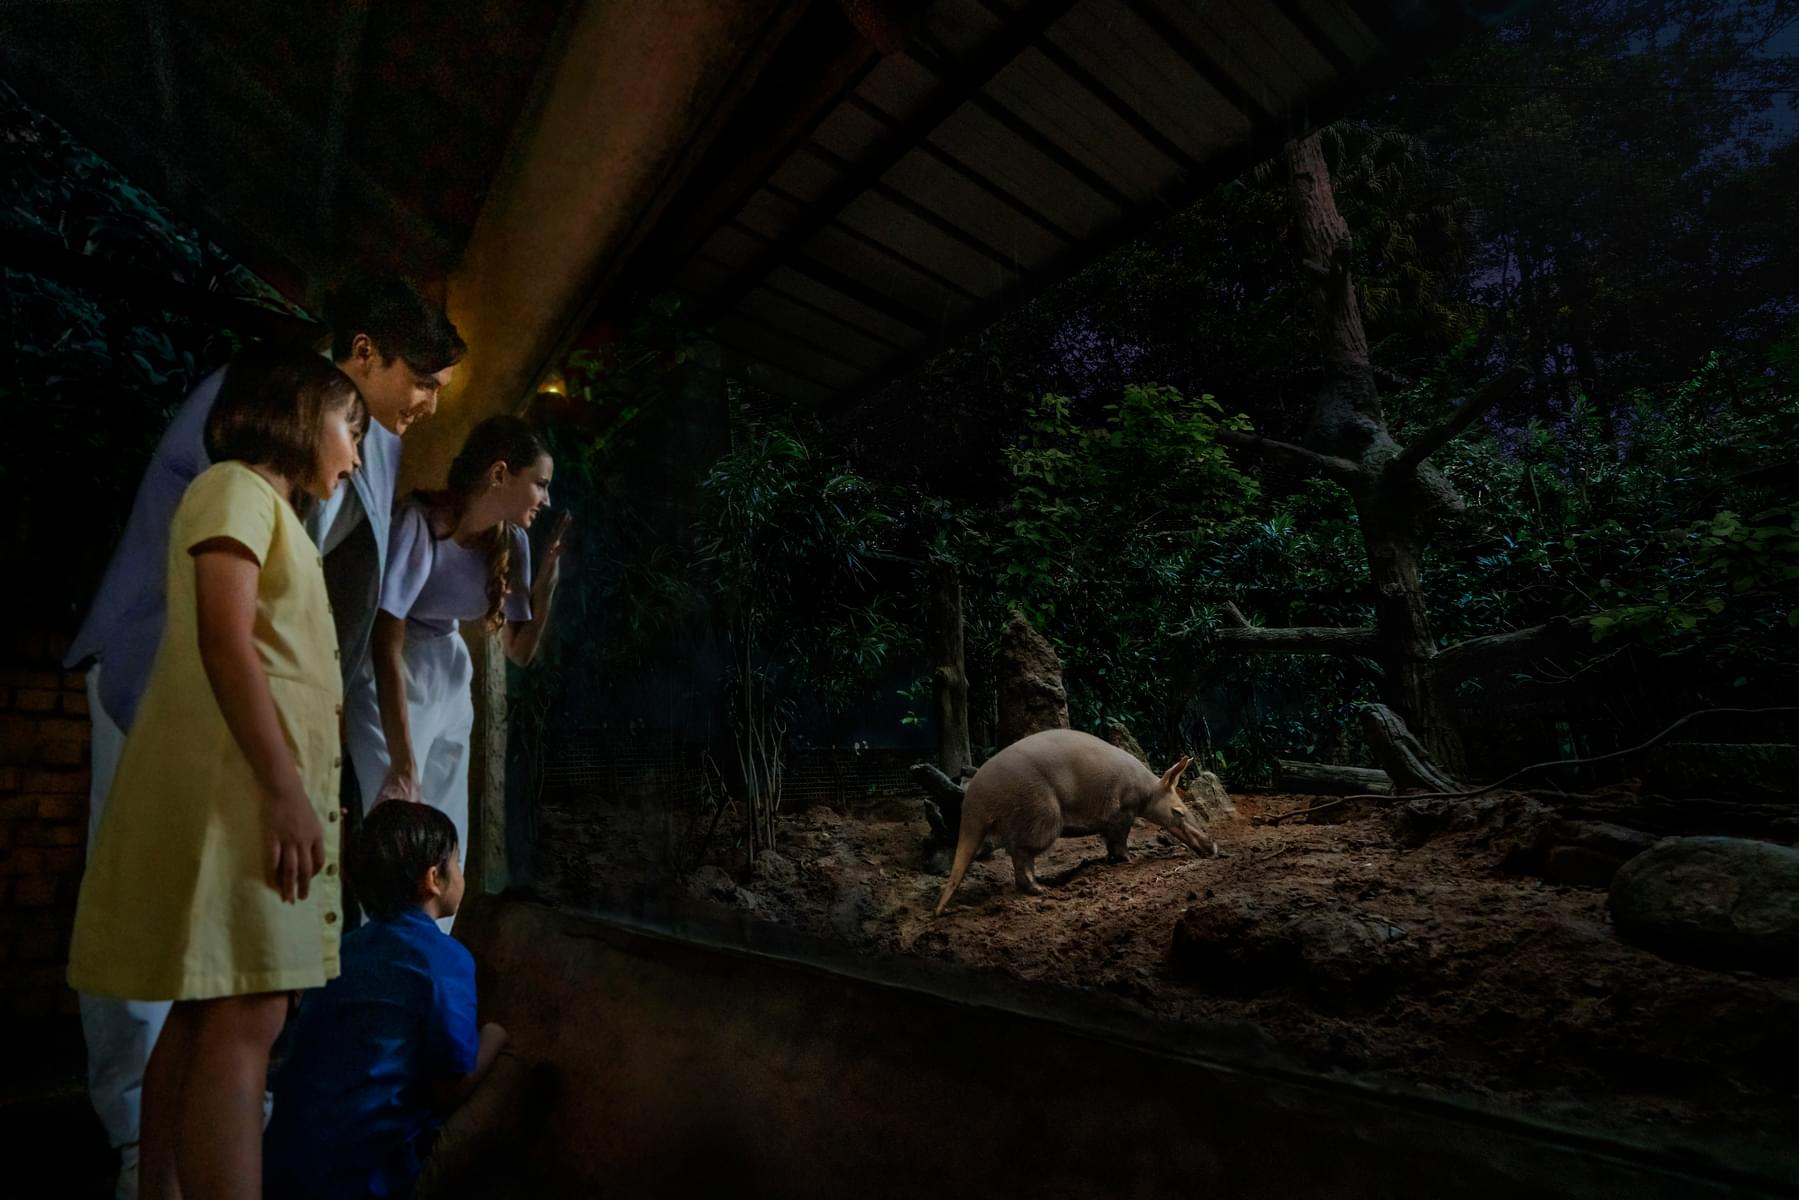 Marvel at the aardvarks in the replicas of their natural habitats